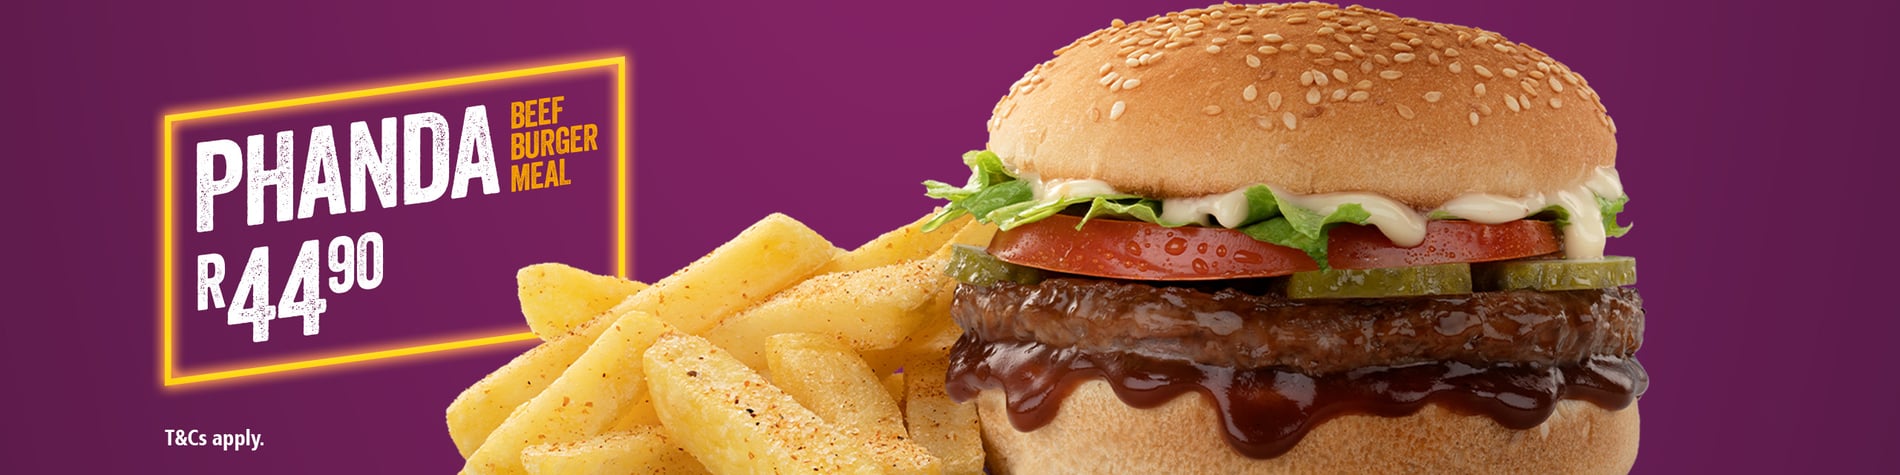 Steers® burger special – Phanda Beef Burger Meal with a beef burger and small hand-cut chips.